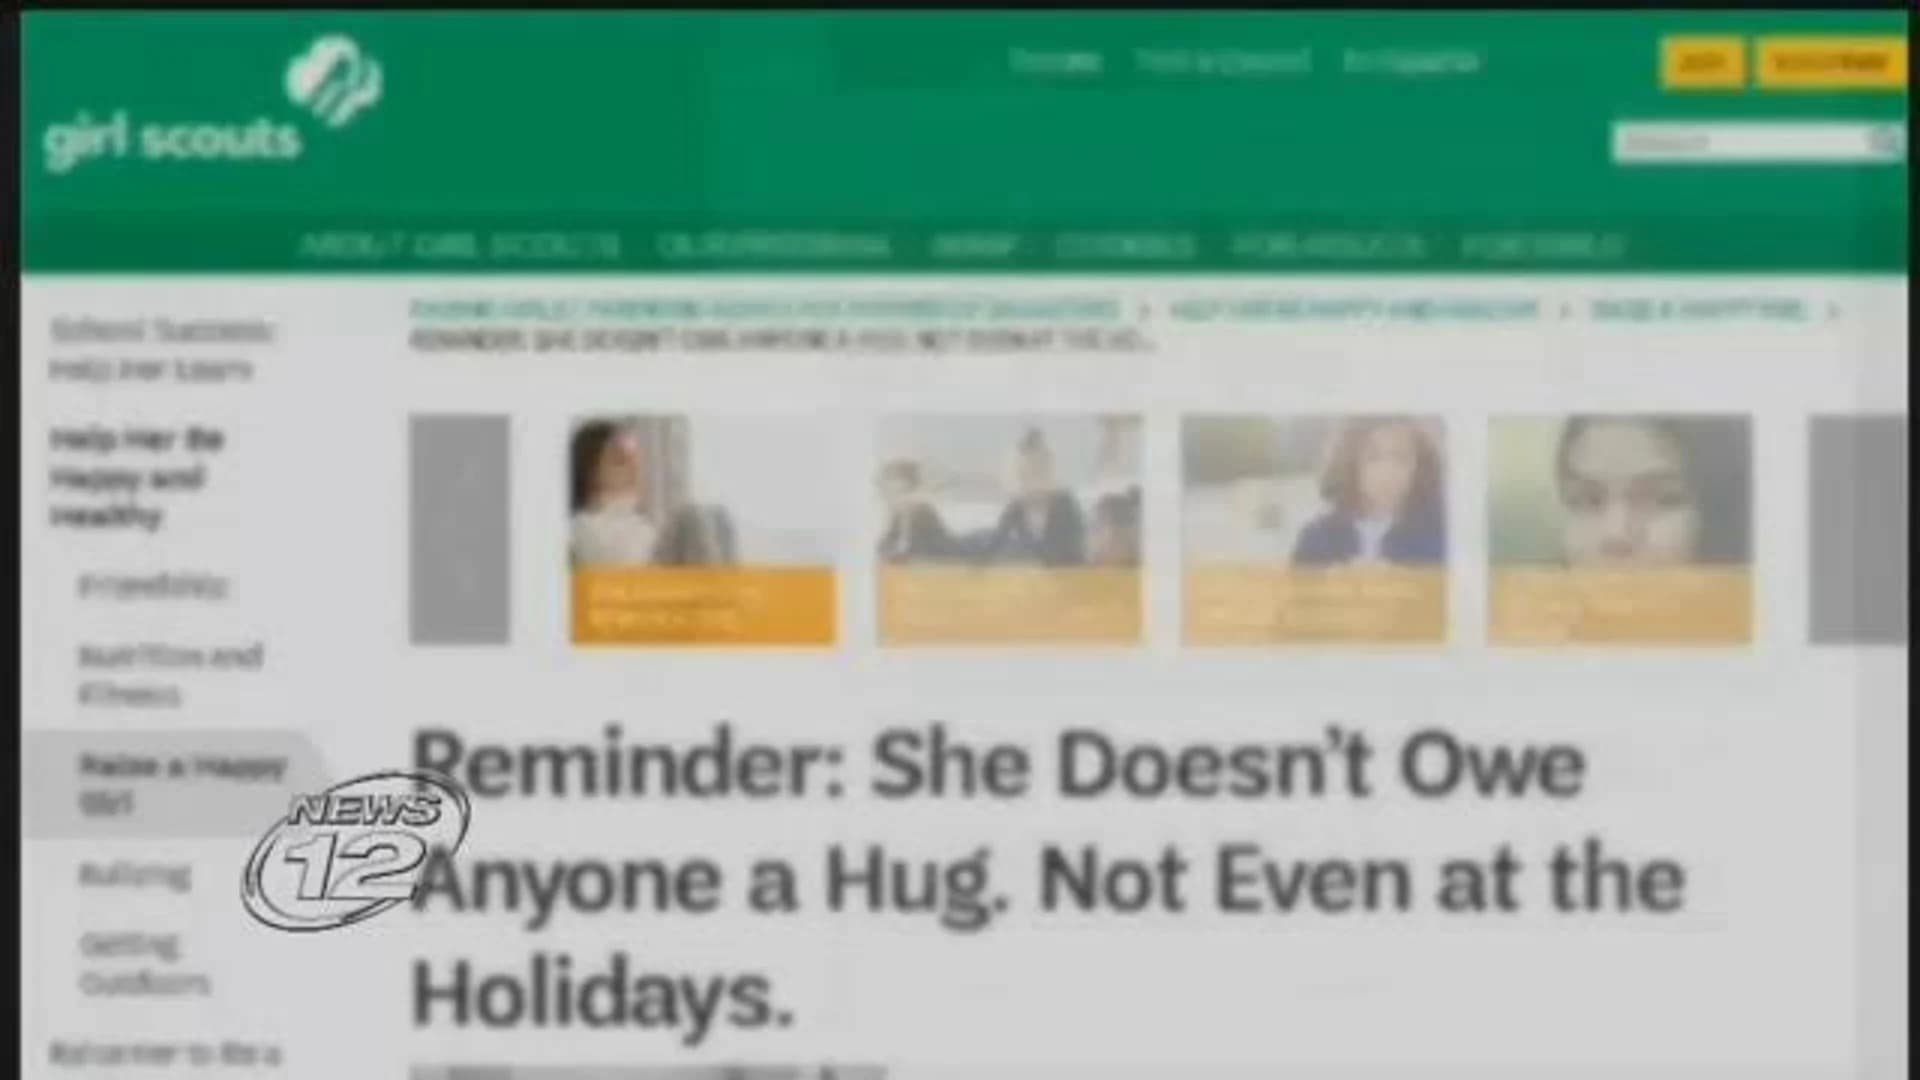 Girl Scouts: Don't force daughters to hug, kiss relatives